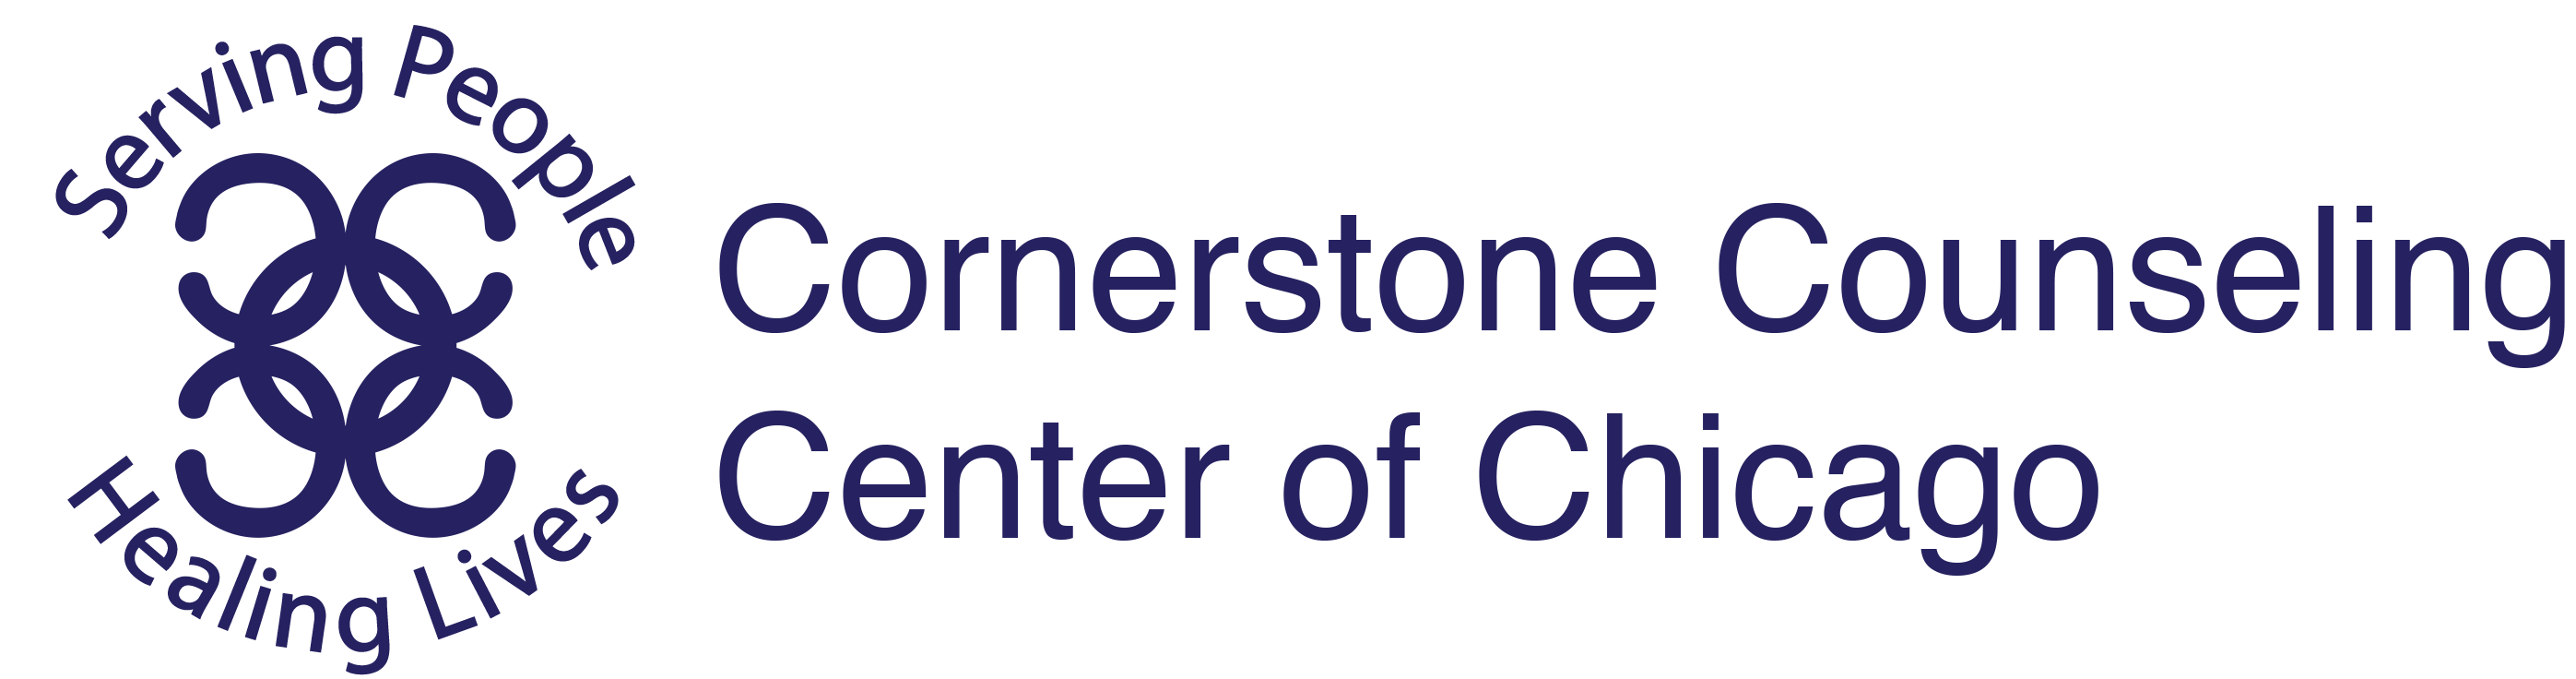 Cornerstone Counseling Center of Chicago